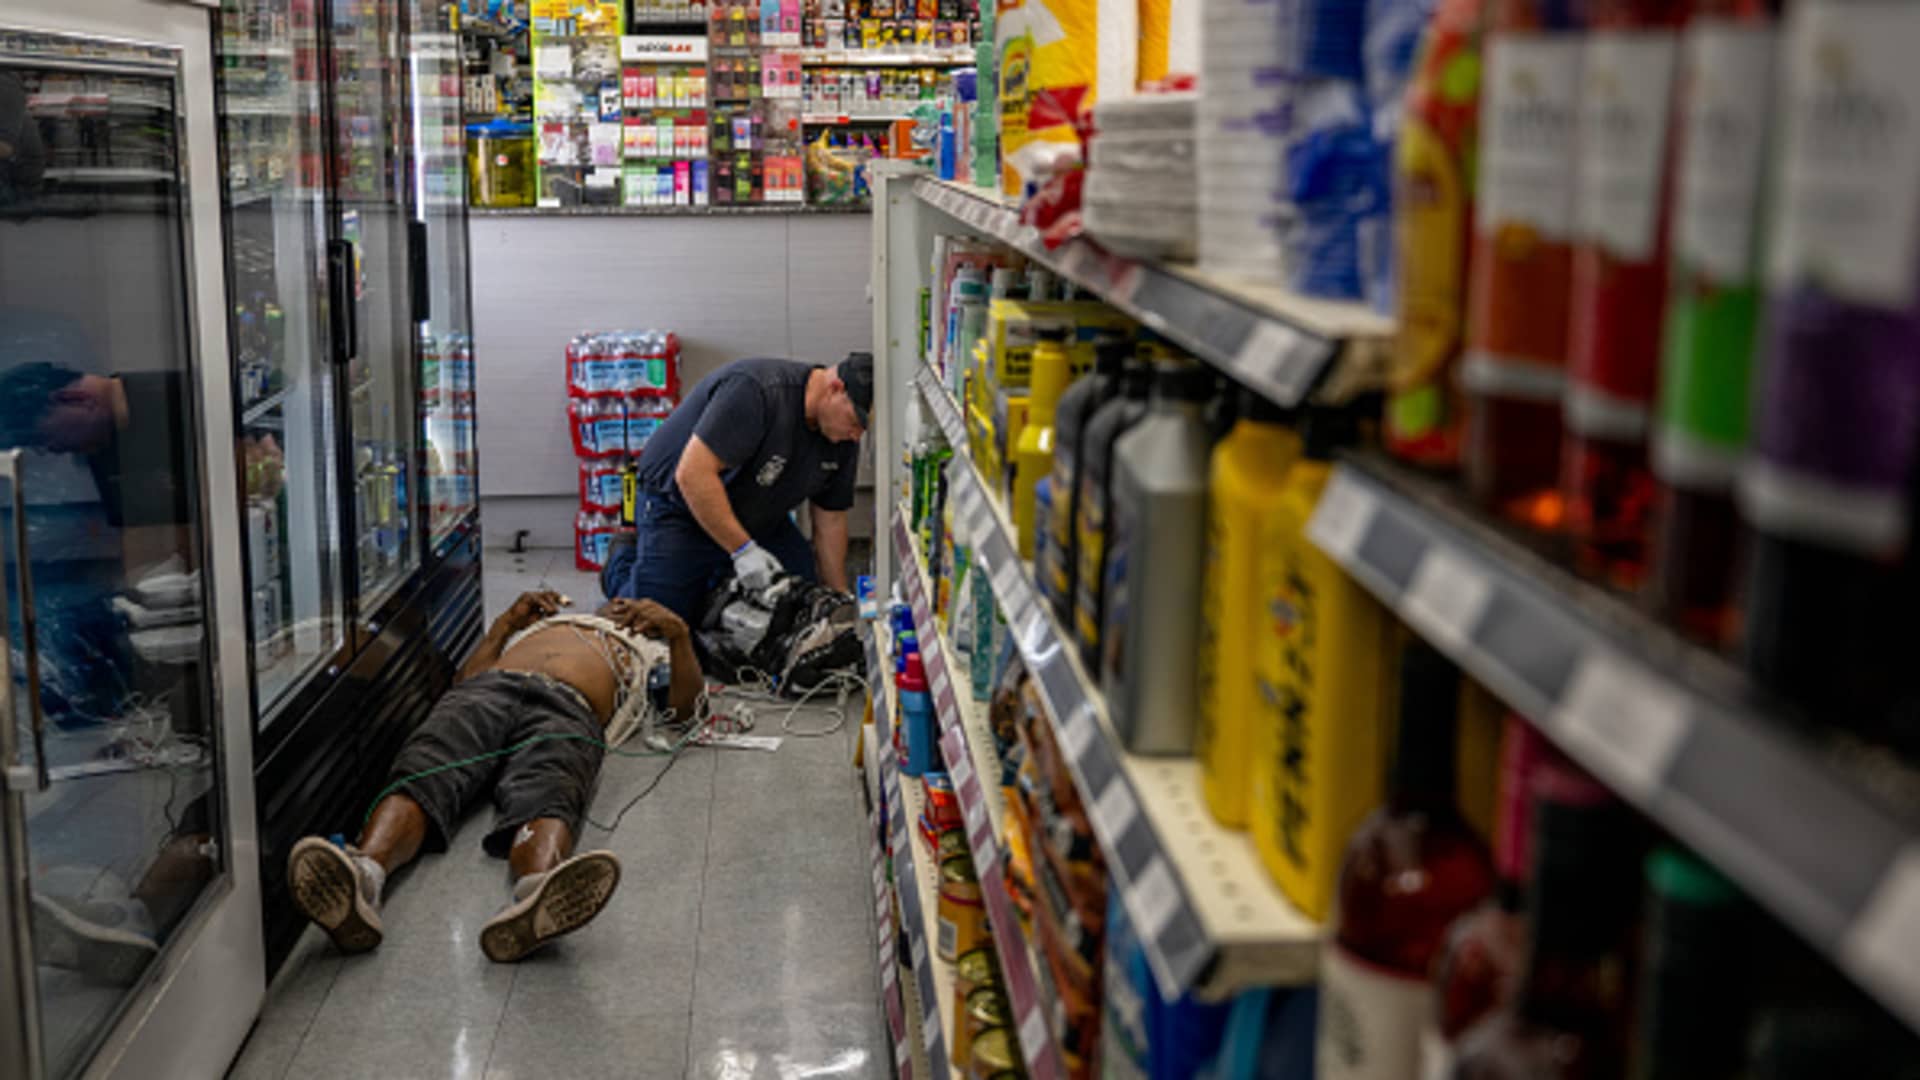 A person receives medical attention after collapsing in a convenience store on July 13, 2023 in Phoenix, Arizona. EMT was called after the person said they experienced hot flashes, dizziness, fatigue and chest pain. Record-breaking temperatures continue soaring as prolonged heatwaves sweep across the Southwest.